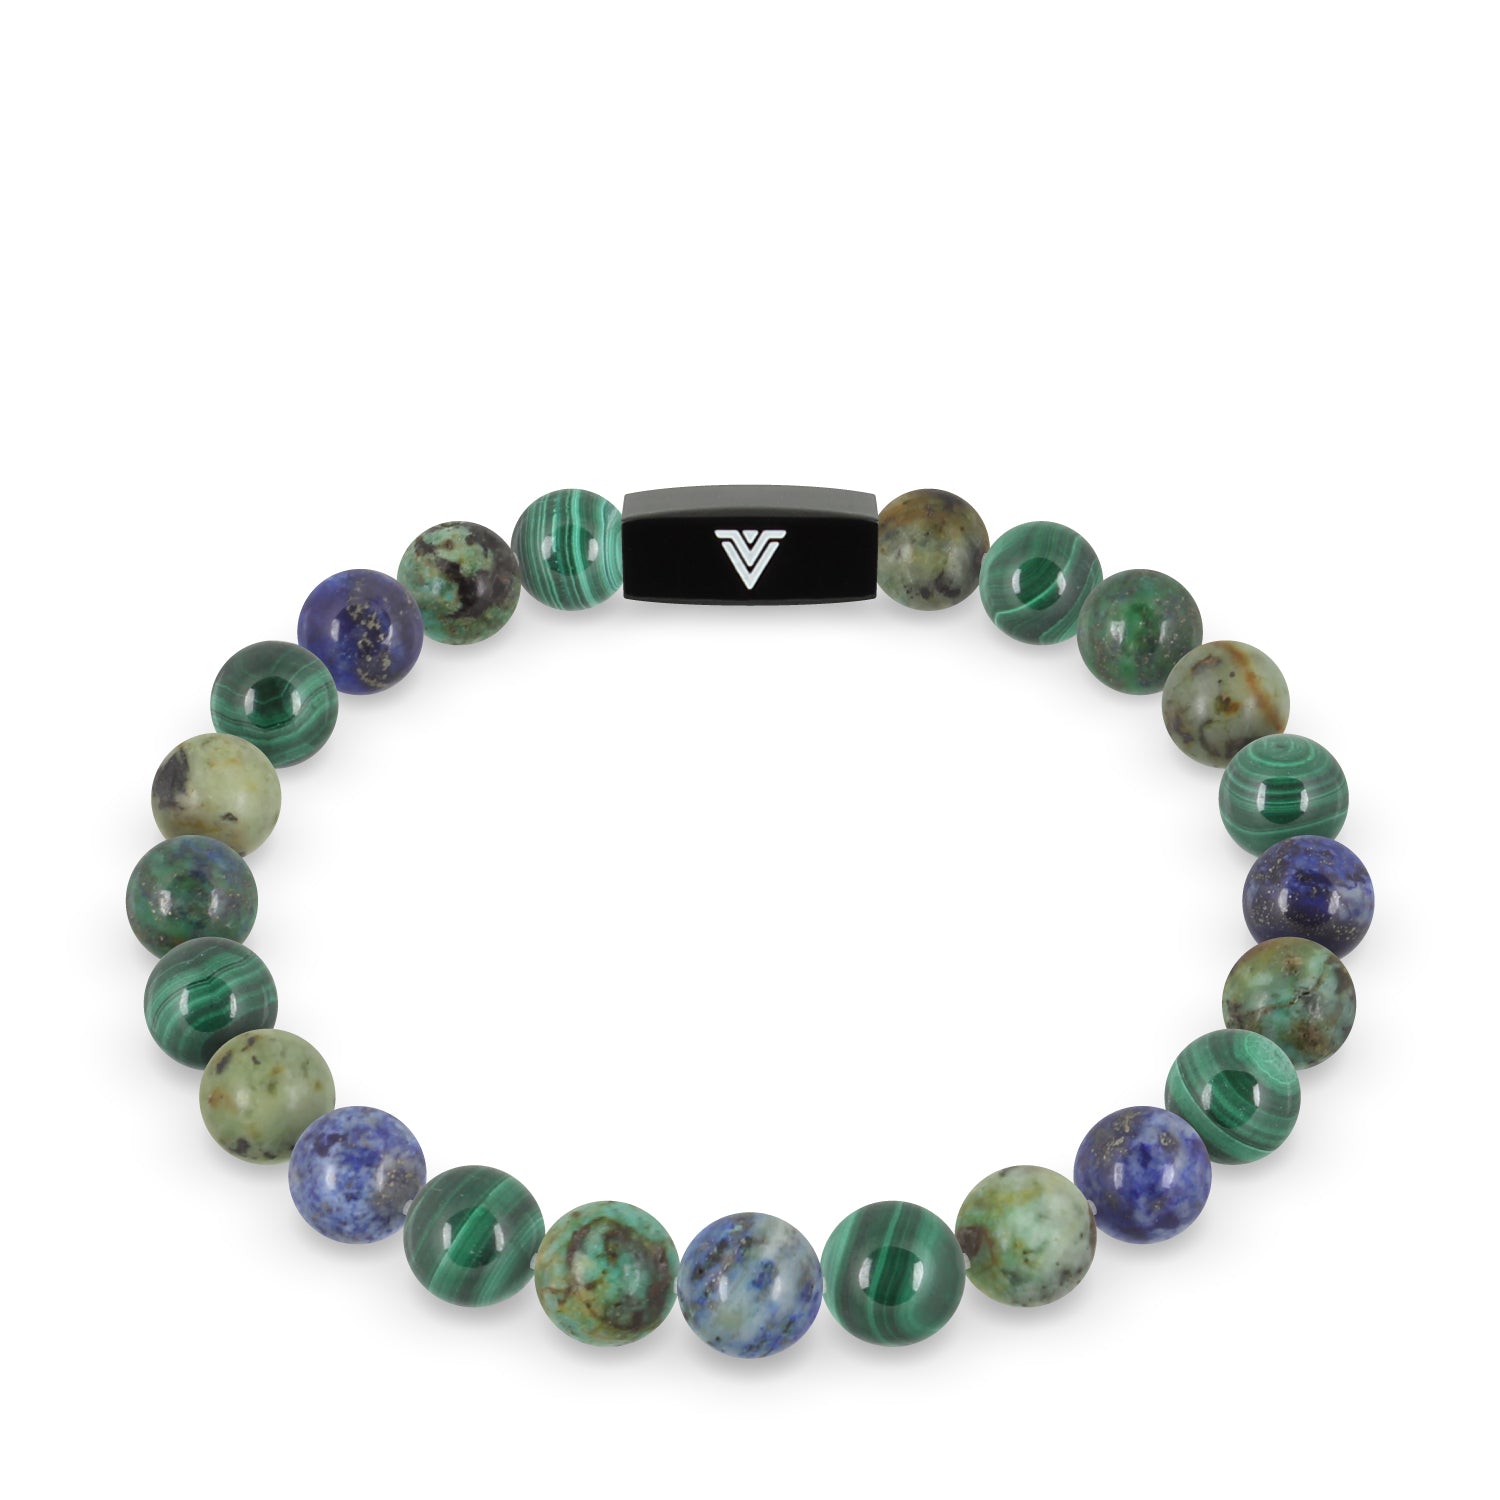 Front view of an 8mm Capricorn Zodiac crystal beaded stretch bracelet with black stainless steel logo bead made by Voltlin